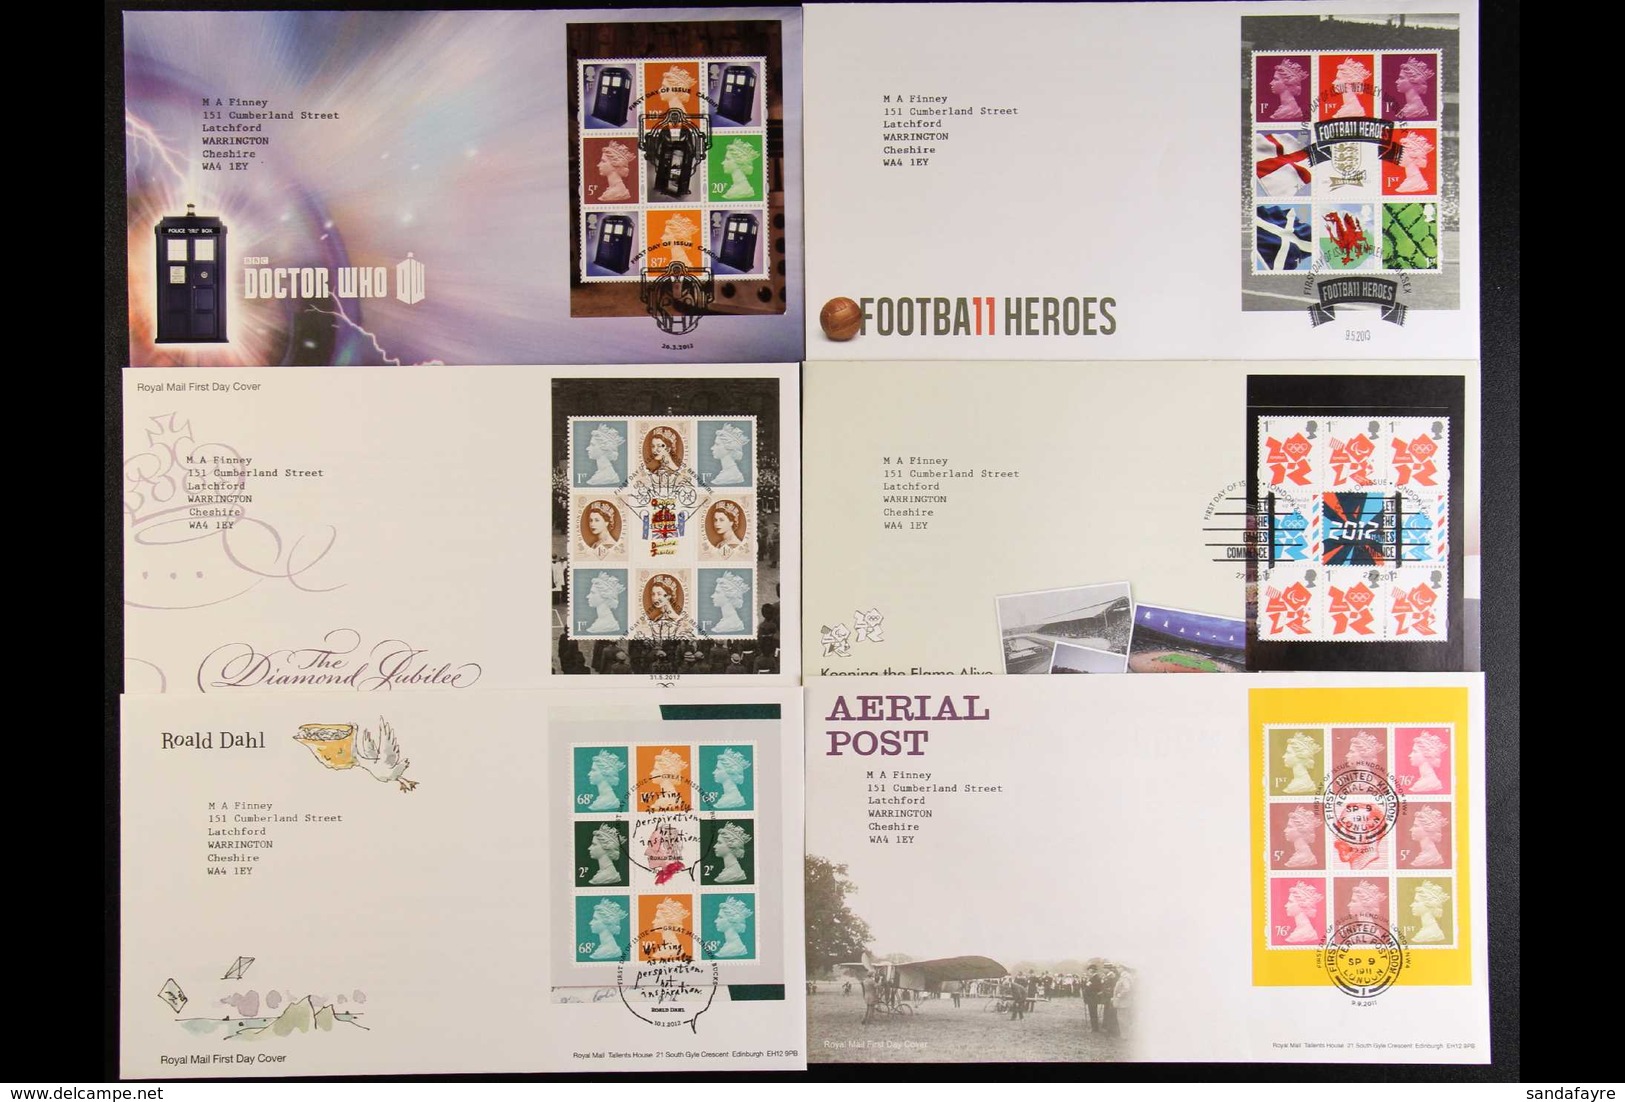 1982-2013 PRESTIGE PANE FDC COLLECTION. A Complete Run Of Prestige Booklet Panes On FDC From The 1982 Stanley Gibbons Is - FDC